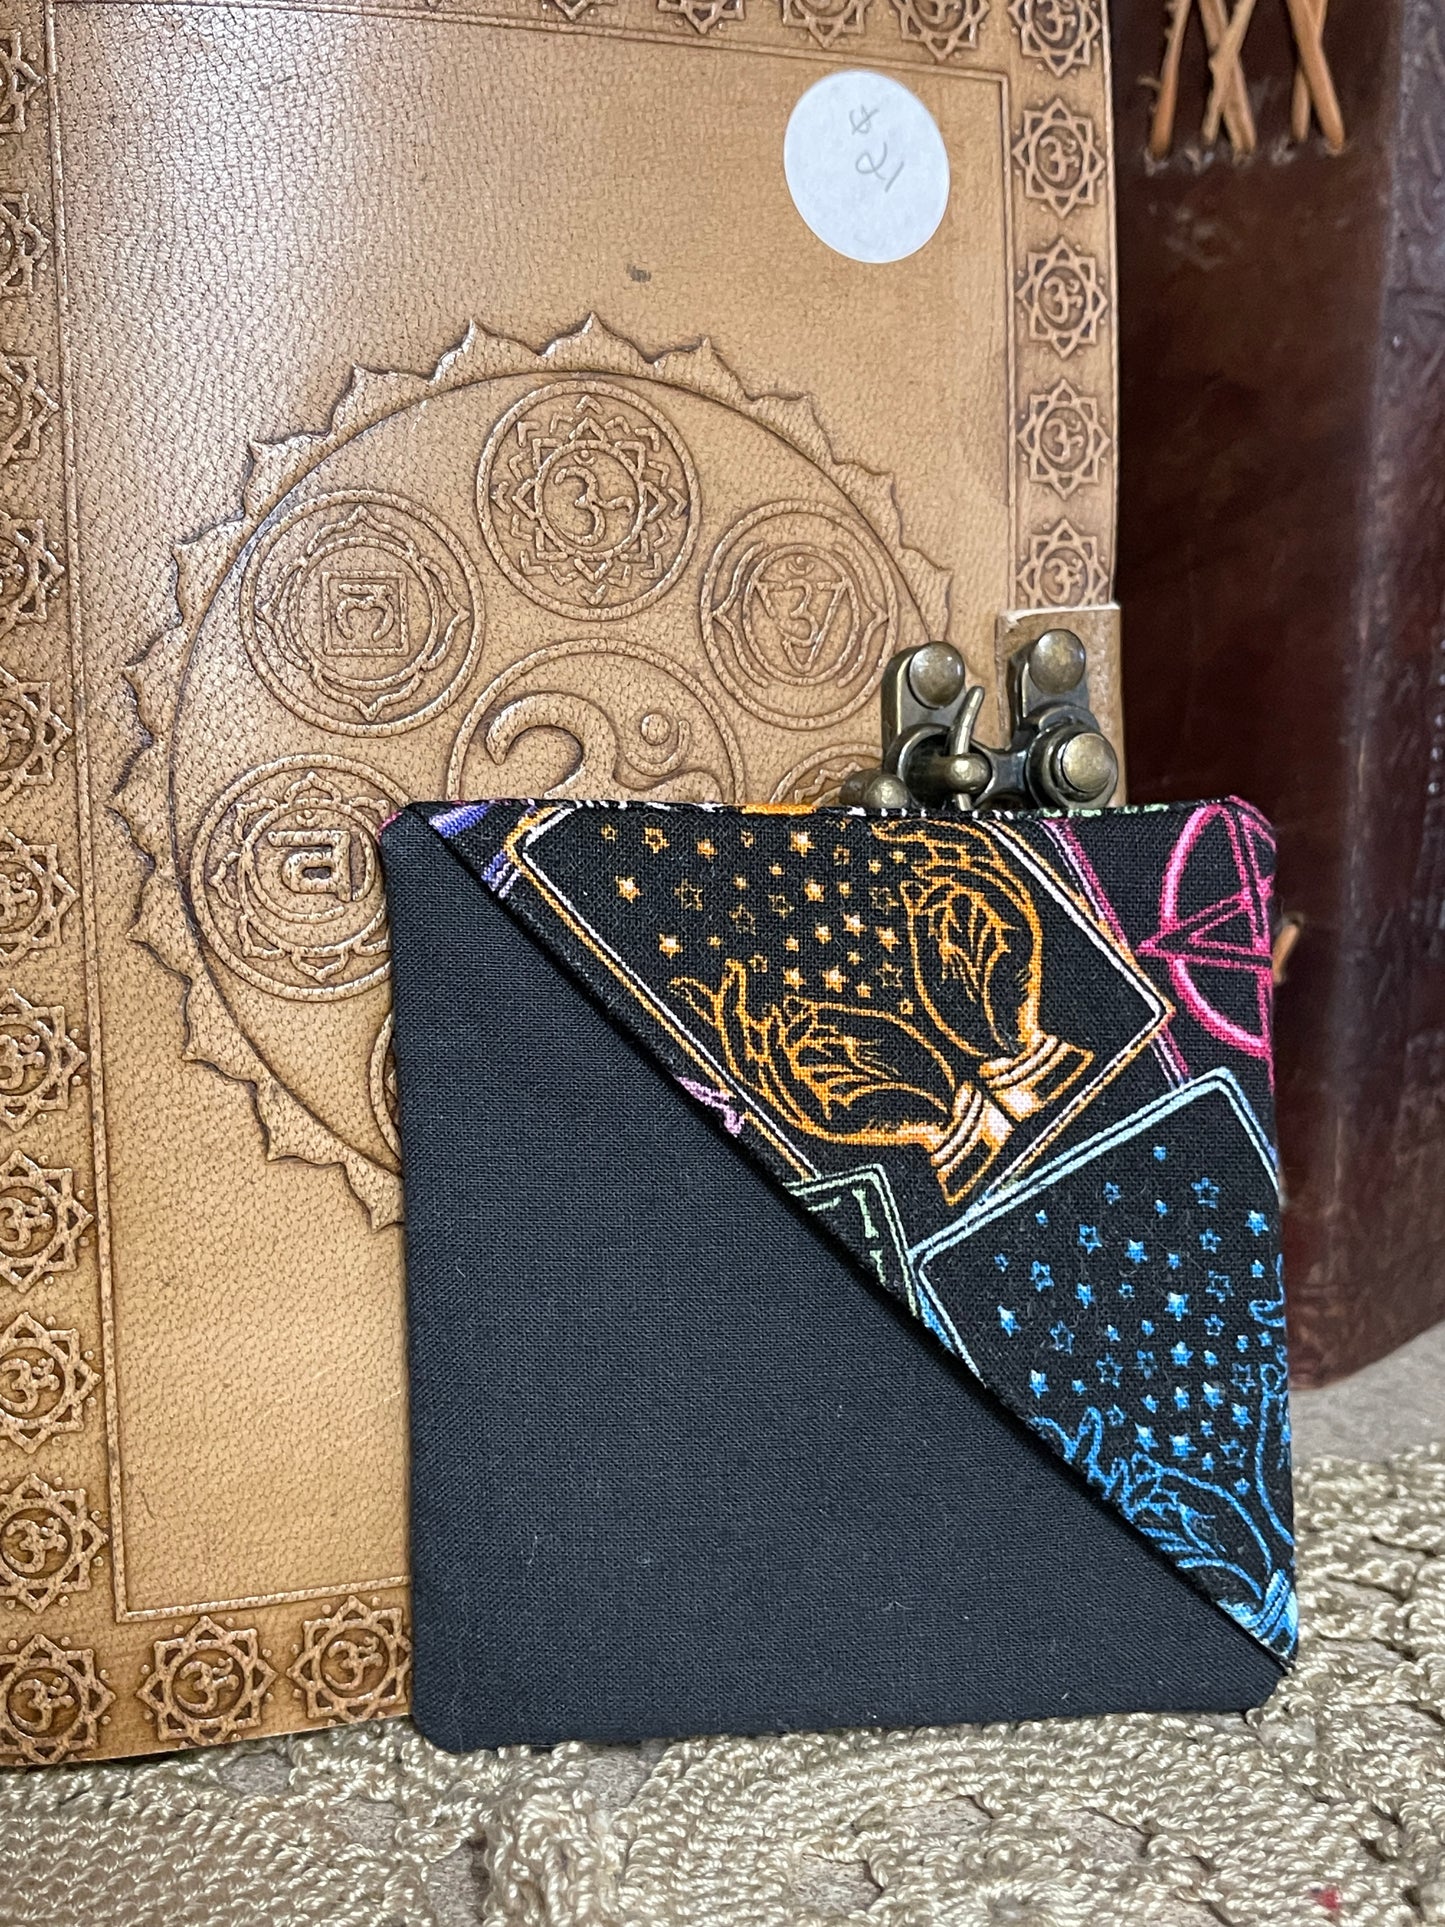 Cloth Book Page Holder / Book Marks Small